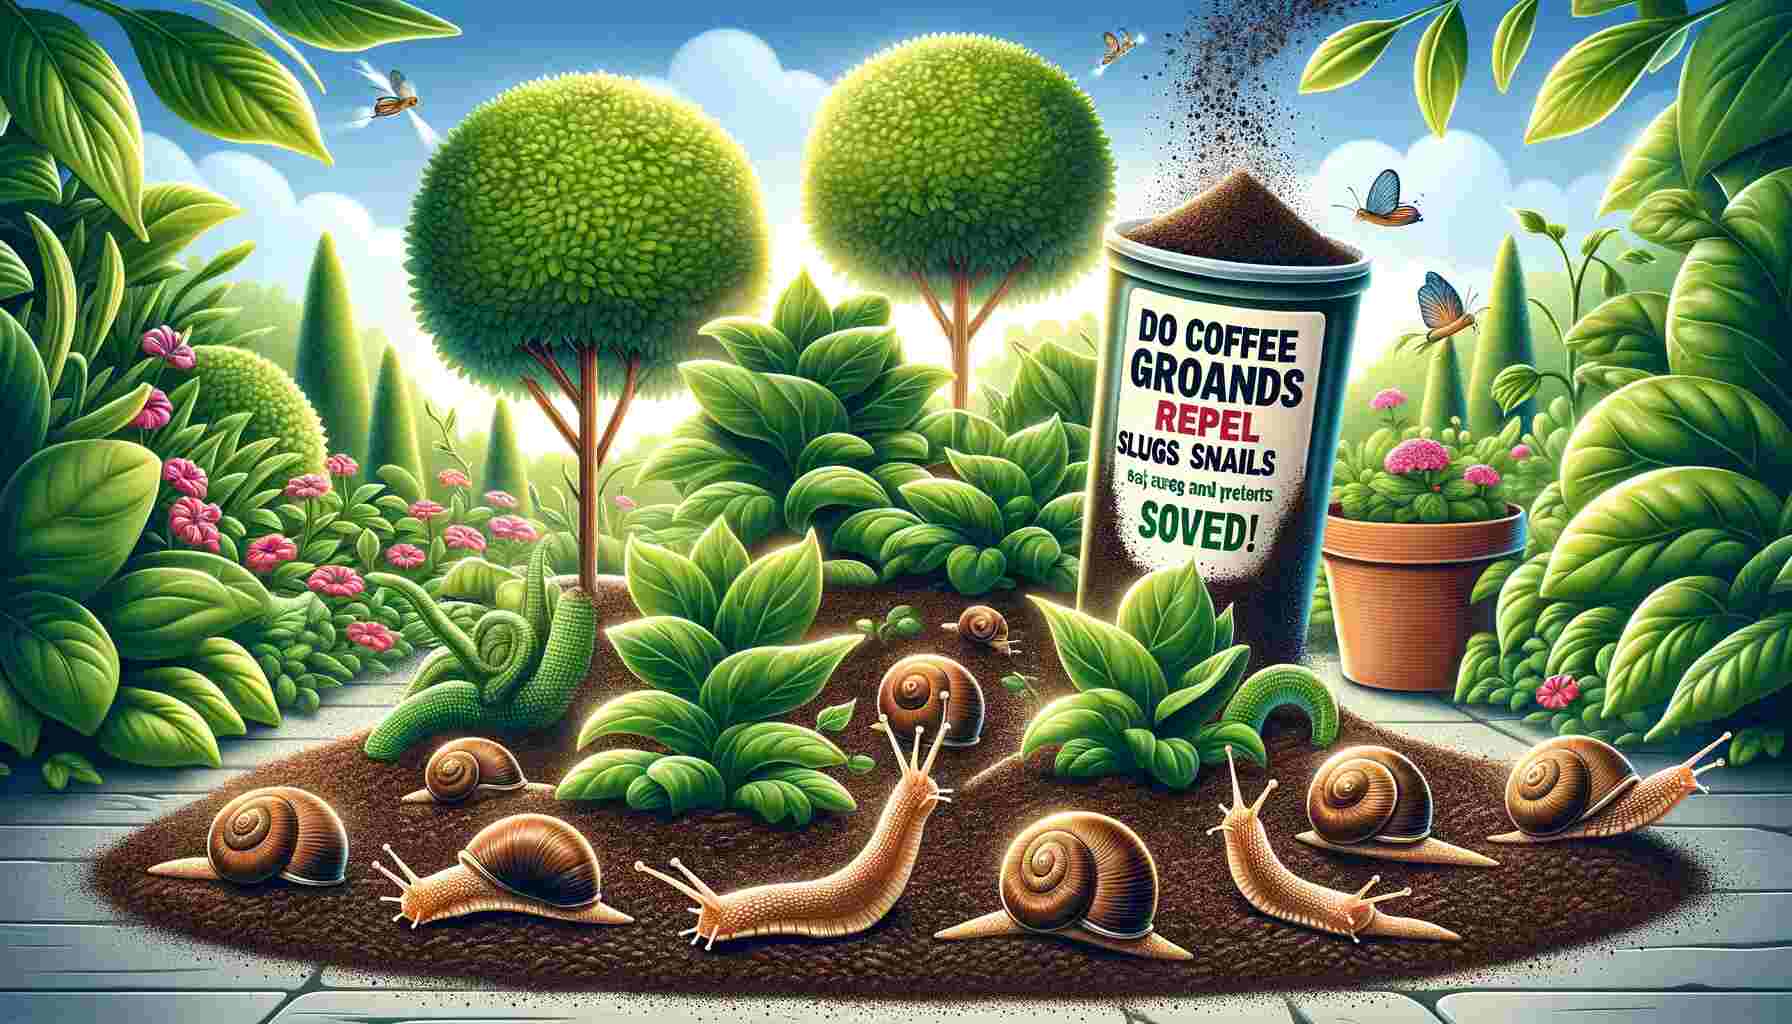 The image features a garden scene with coffee grounds sprinkled around various plants. In the foreground, slugs and snails are shown being repelled by the coffee grounds, visibly moving away from the plants. The background highlights healthy, flourishing plants, suggesting they are protected by the coffee grounds barrier. The overall scene is vibrant, emphasizing the effectiveness of coffee grounds against slugs and snails in a garden setting.